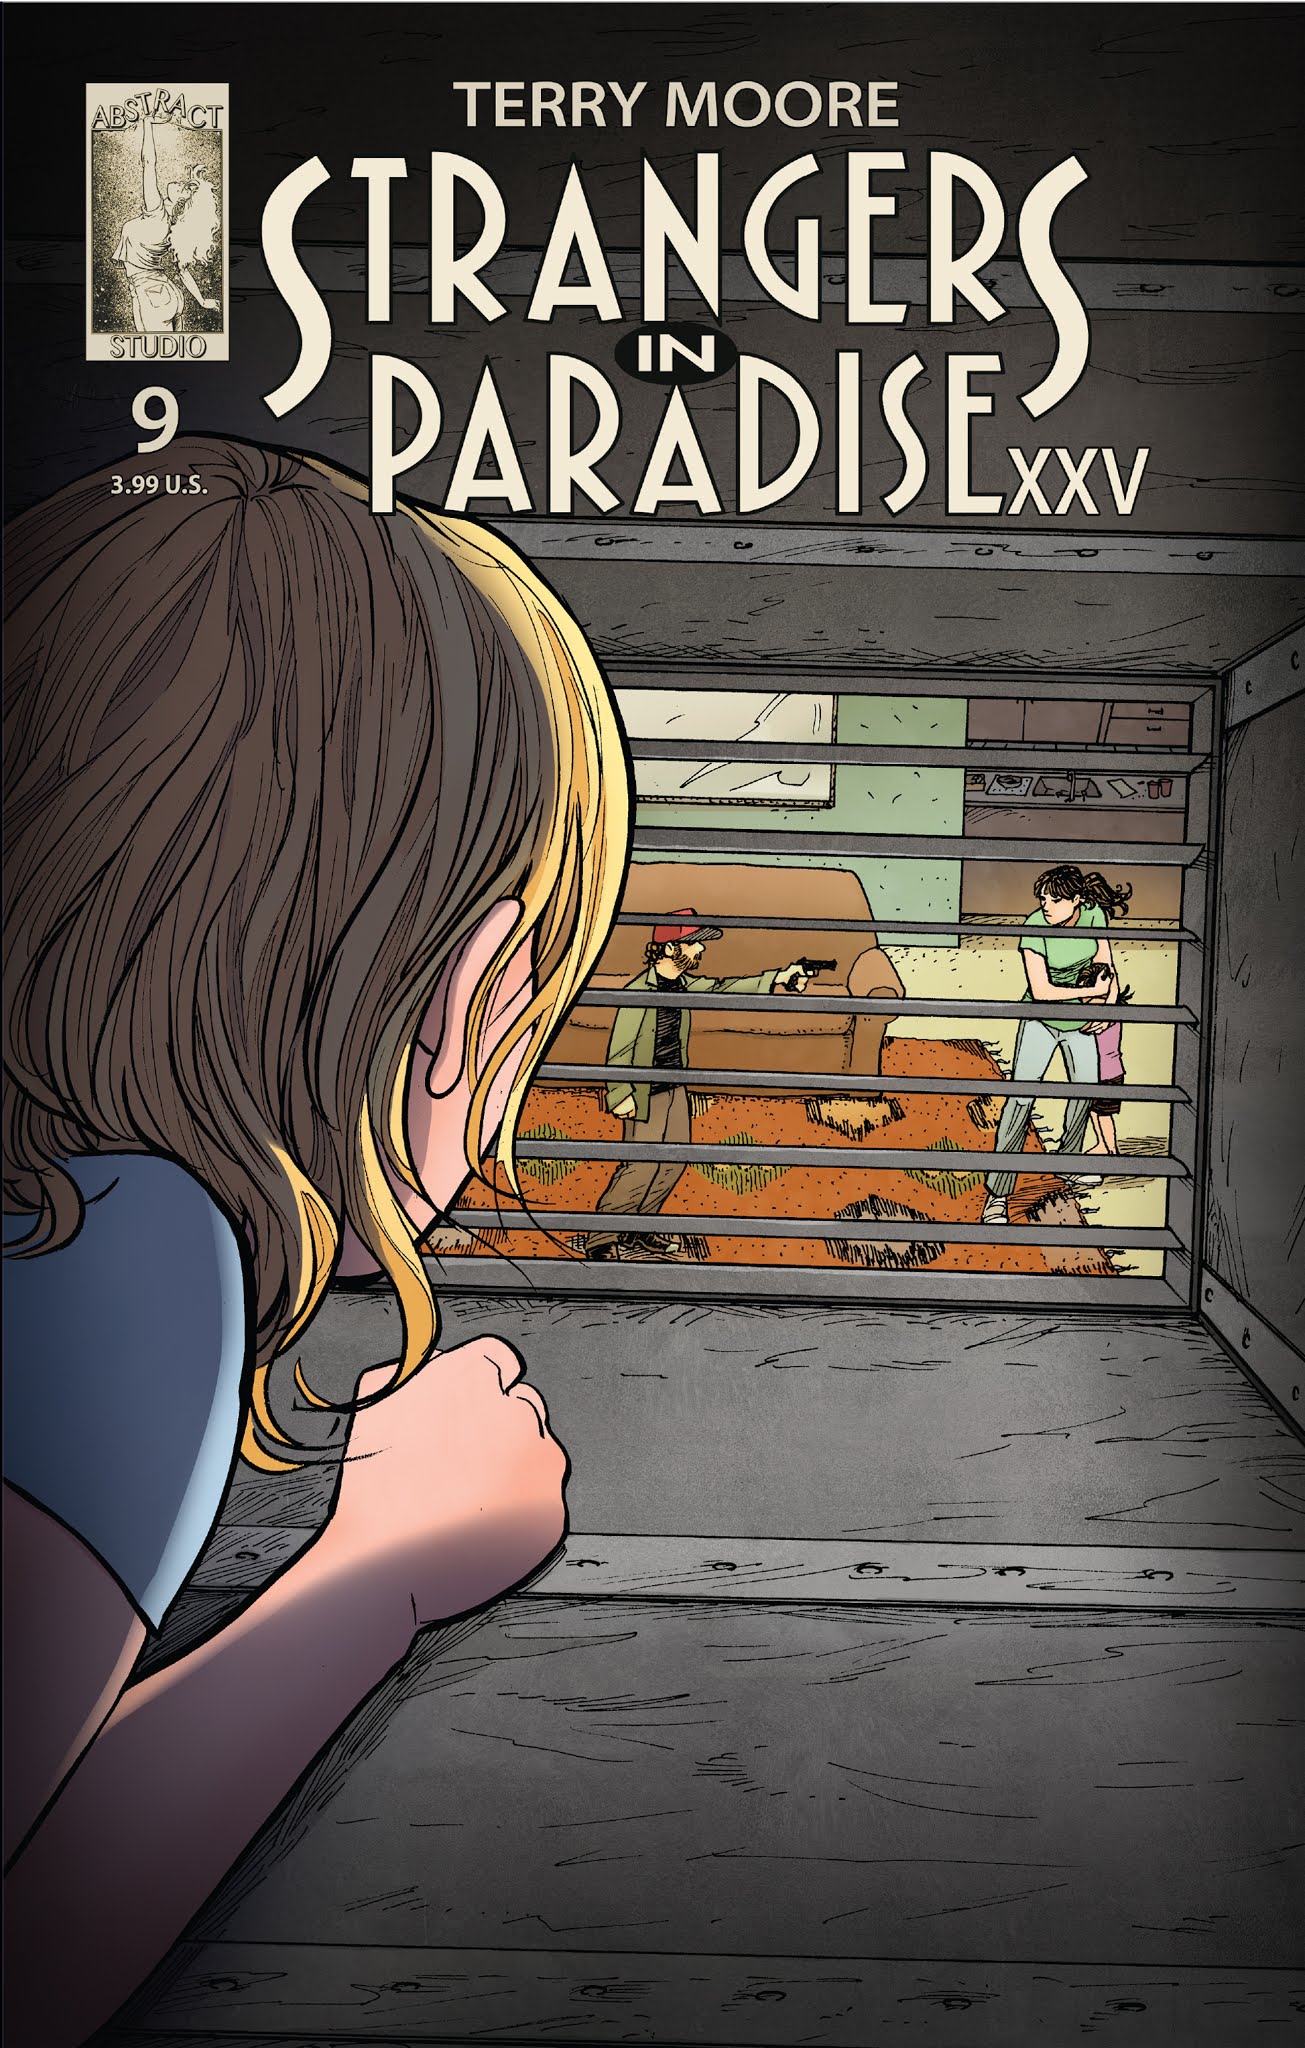 Read online Strangers in Paradise XXV comic -  Issue #9 - 1